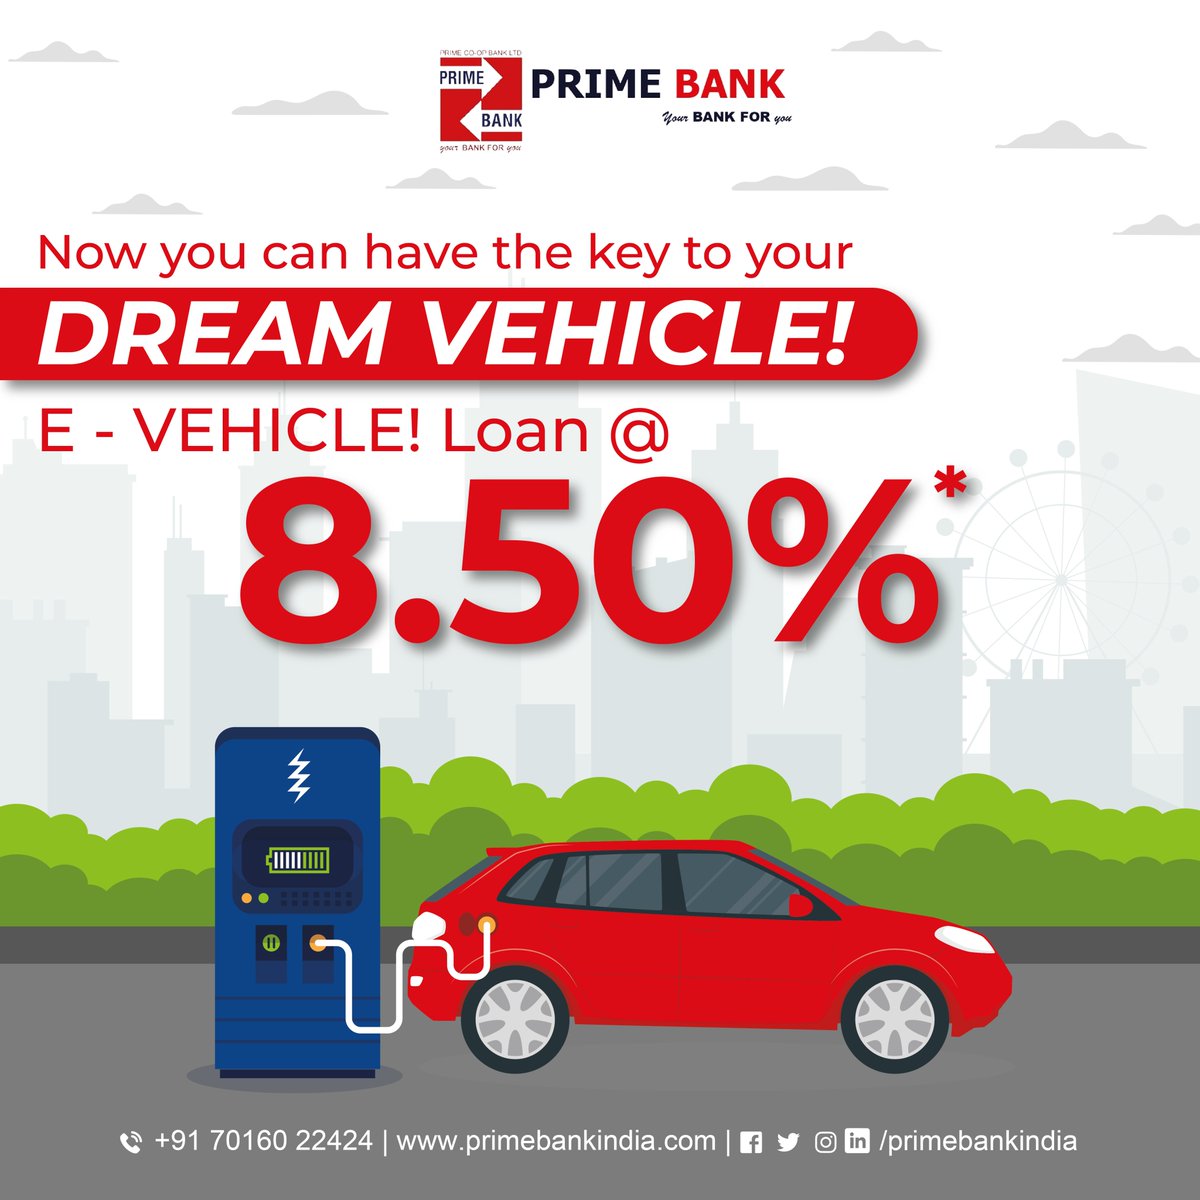 You can have the key to your Dream Vehicle with Prime Bank E-Vehicle Loan at the lowest Interest rate.

Start your your EV-Journey with Prime Bank

#EV #evloan ##electricvehicles #vehicleloan #Green #loanintreset #PrimeBank